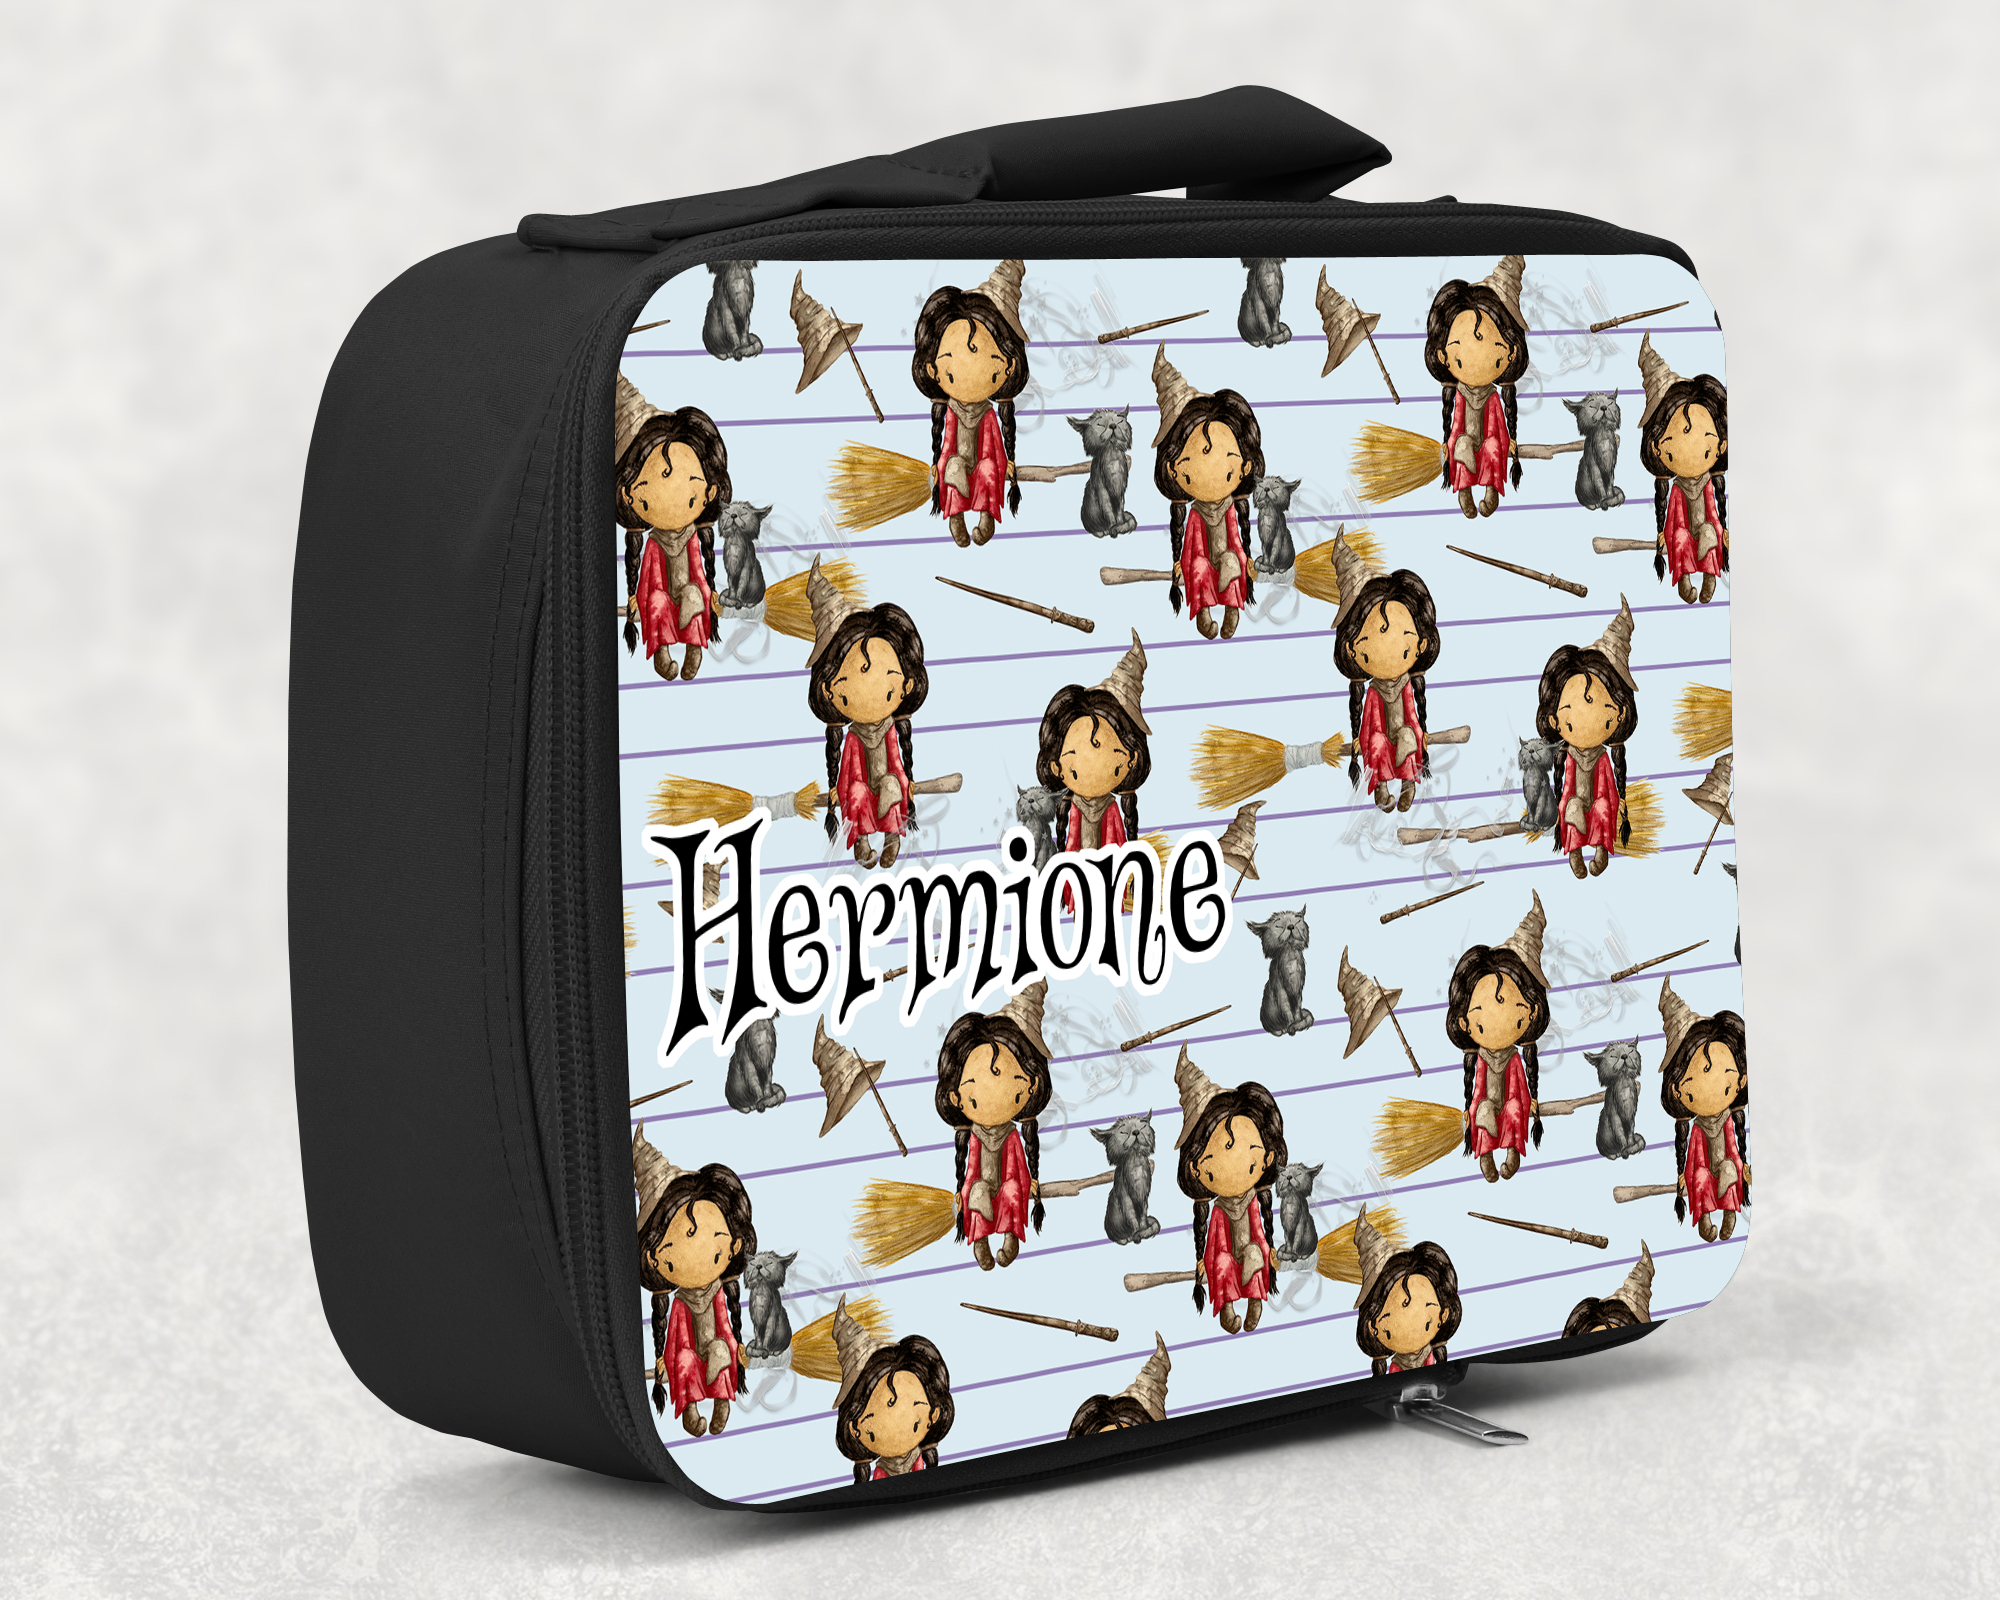 children's insulated lunch bag with bright colourful personalised printed design in harry potter witches design